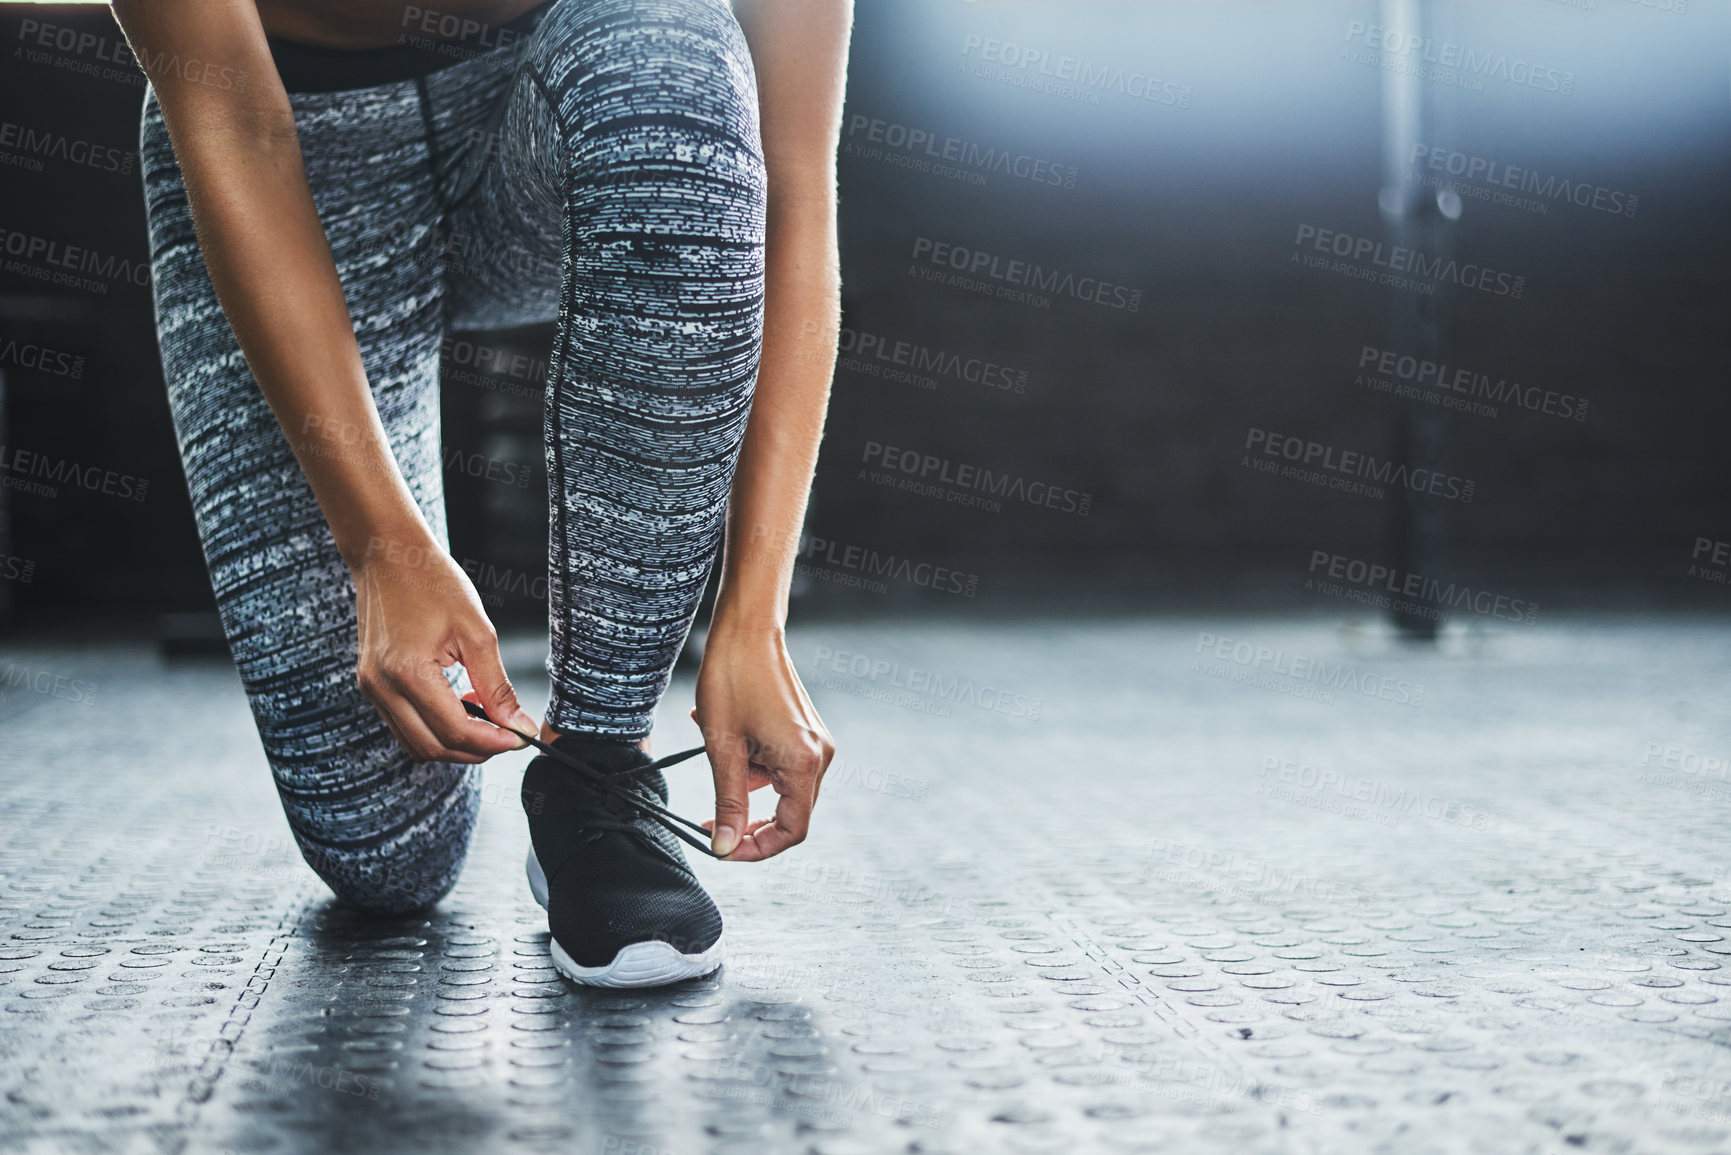 Buy stock photo Cropped shot of a woman tying her shoelaces in a gym